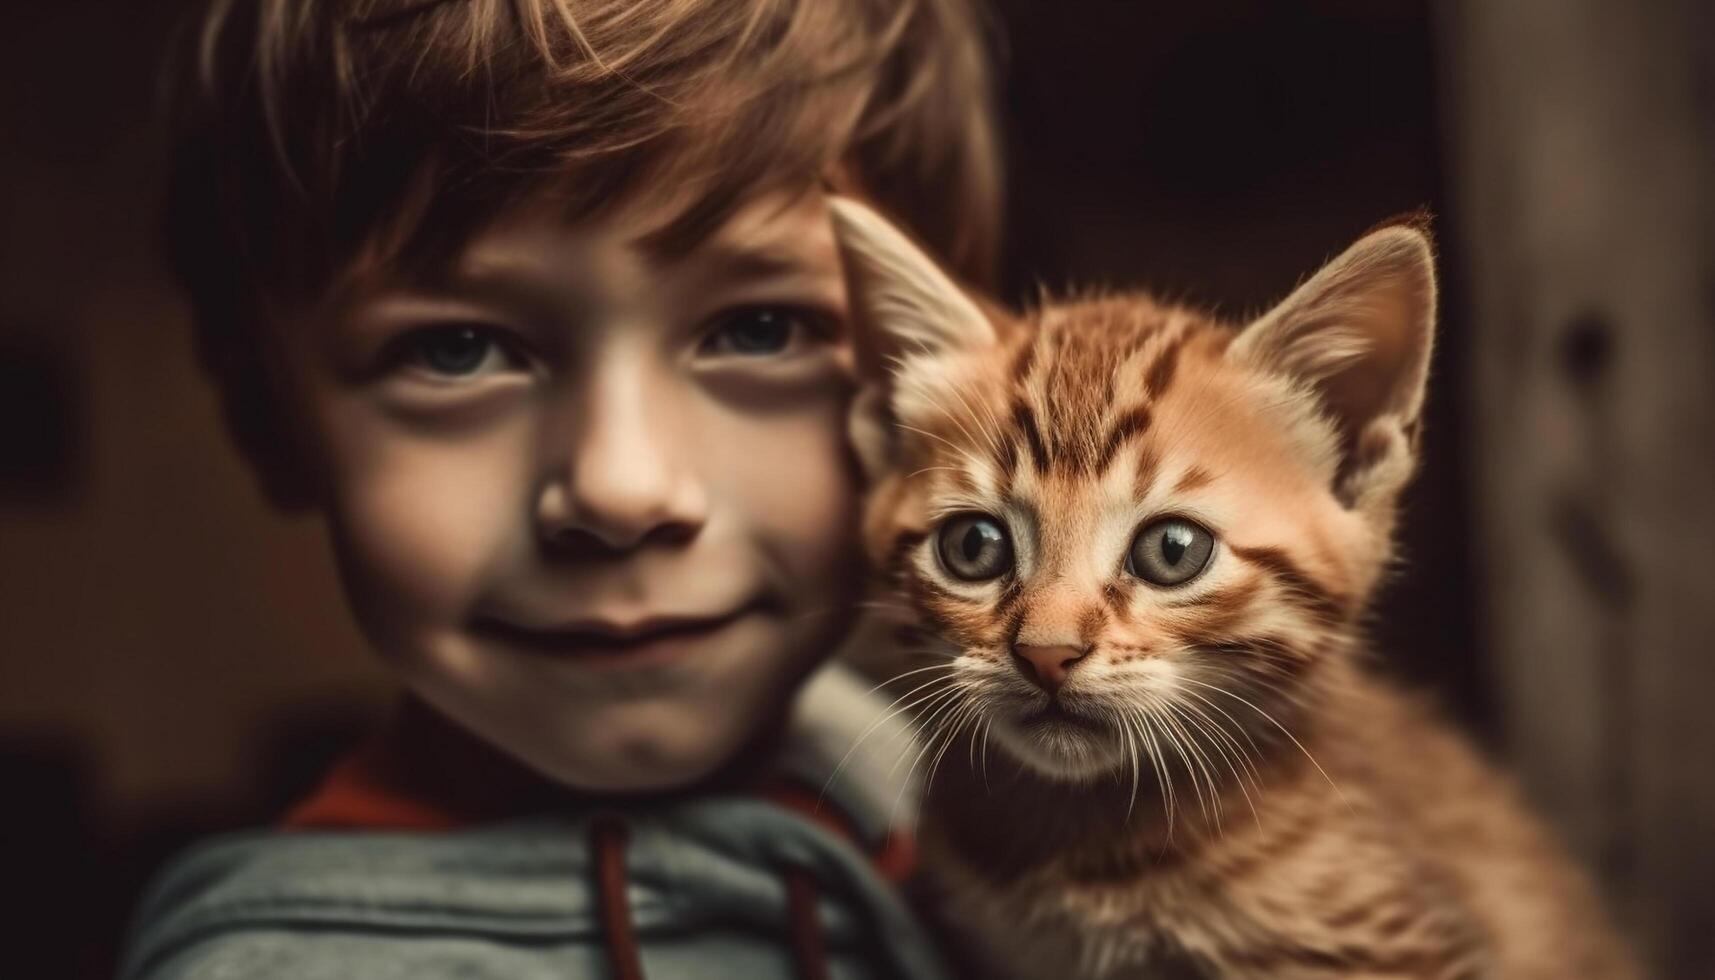 Smiling child embraces playful kitten in heartwarming portrait indoors generated by AI photo